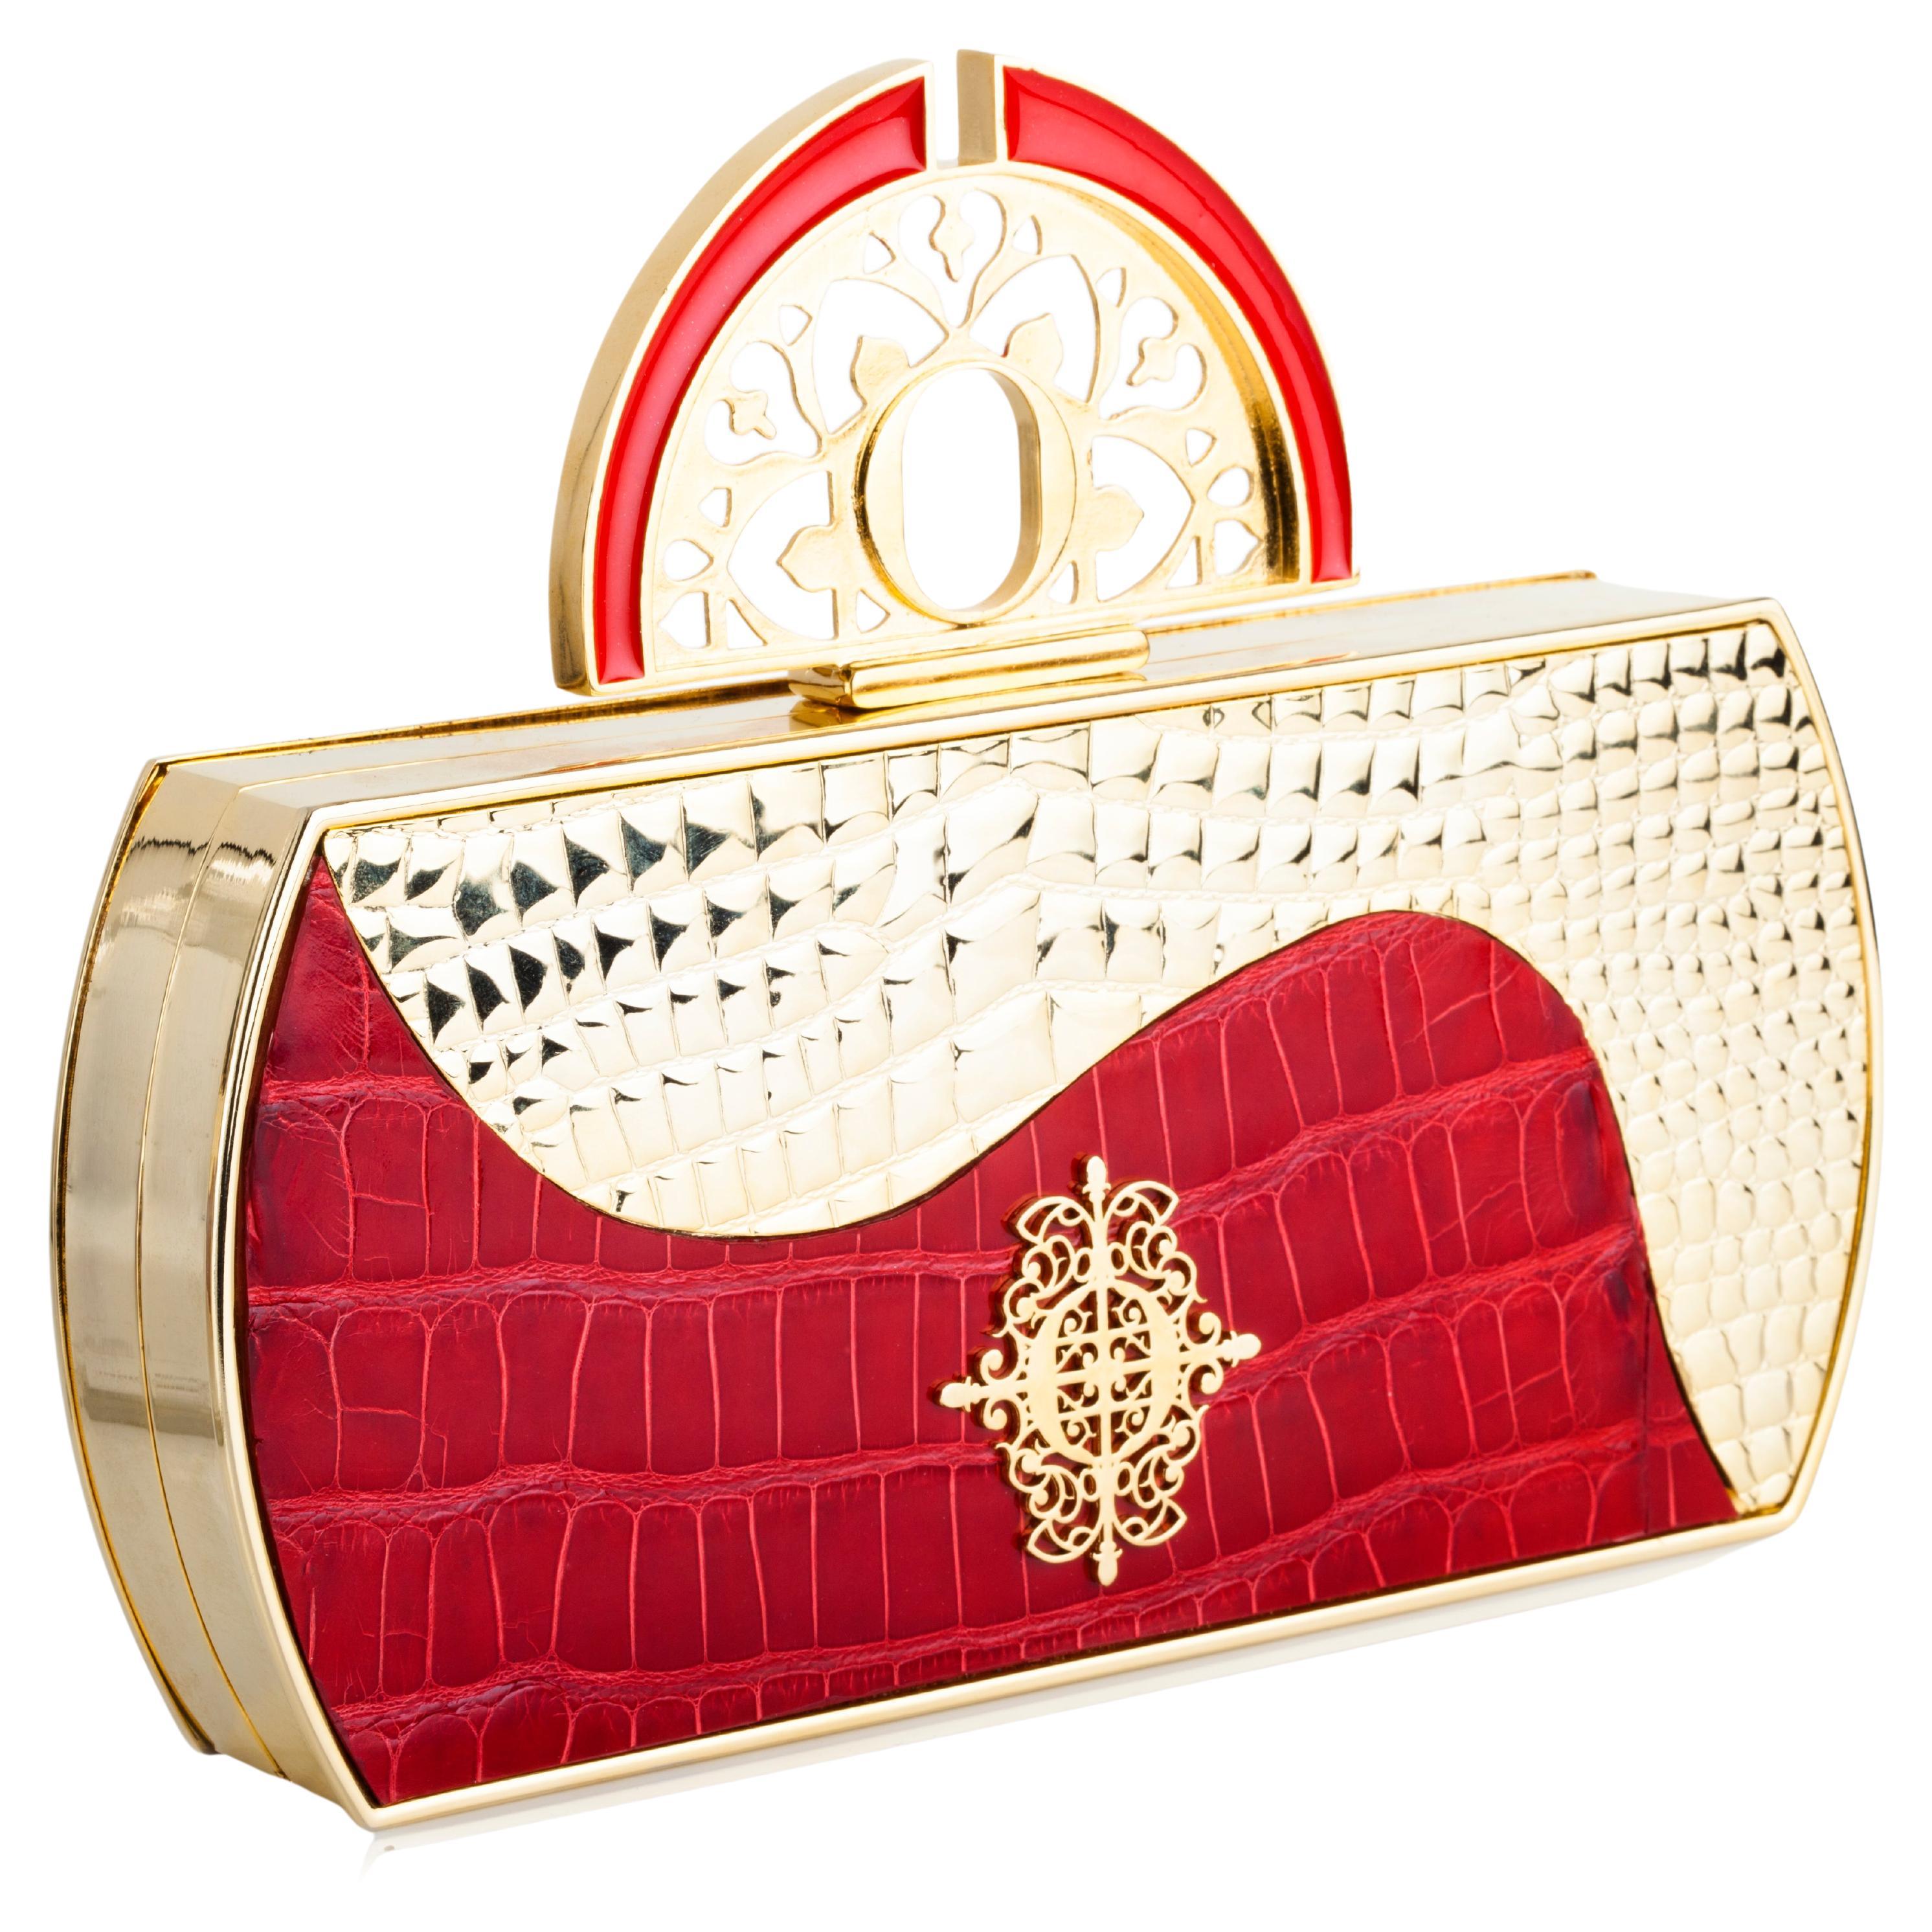 Bochic “Alicia” Limited Edition Jeweled Clutch For Sale